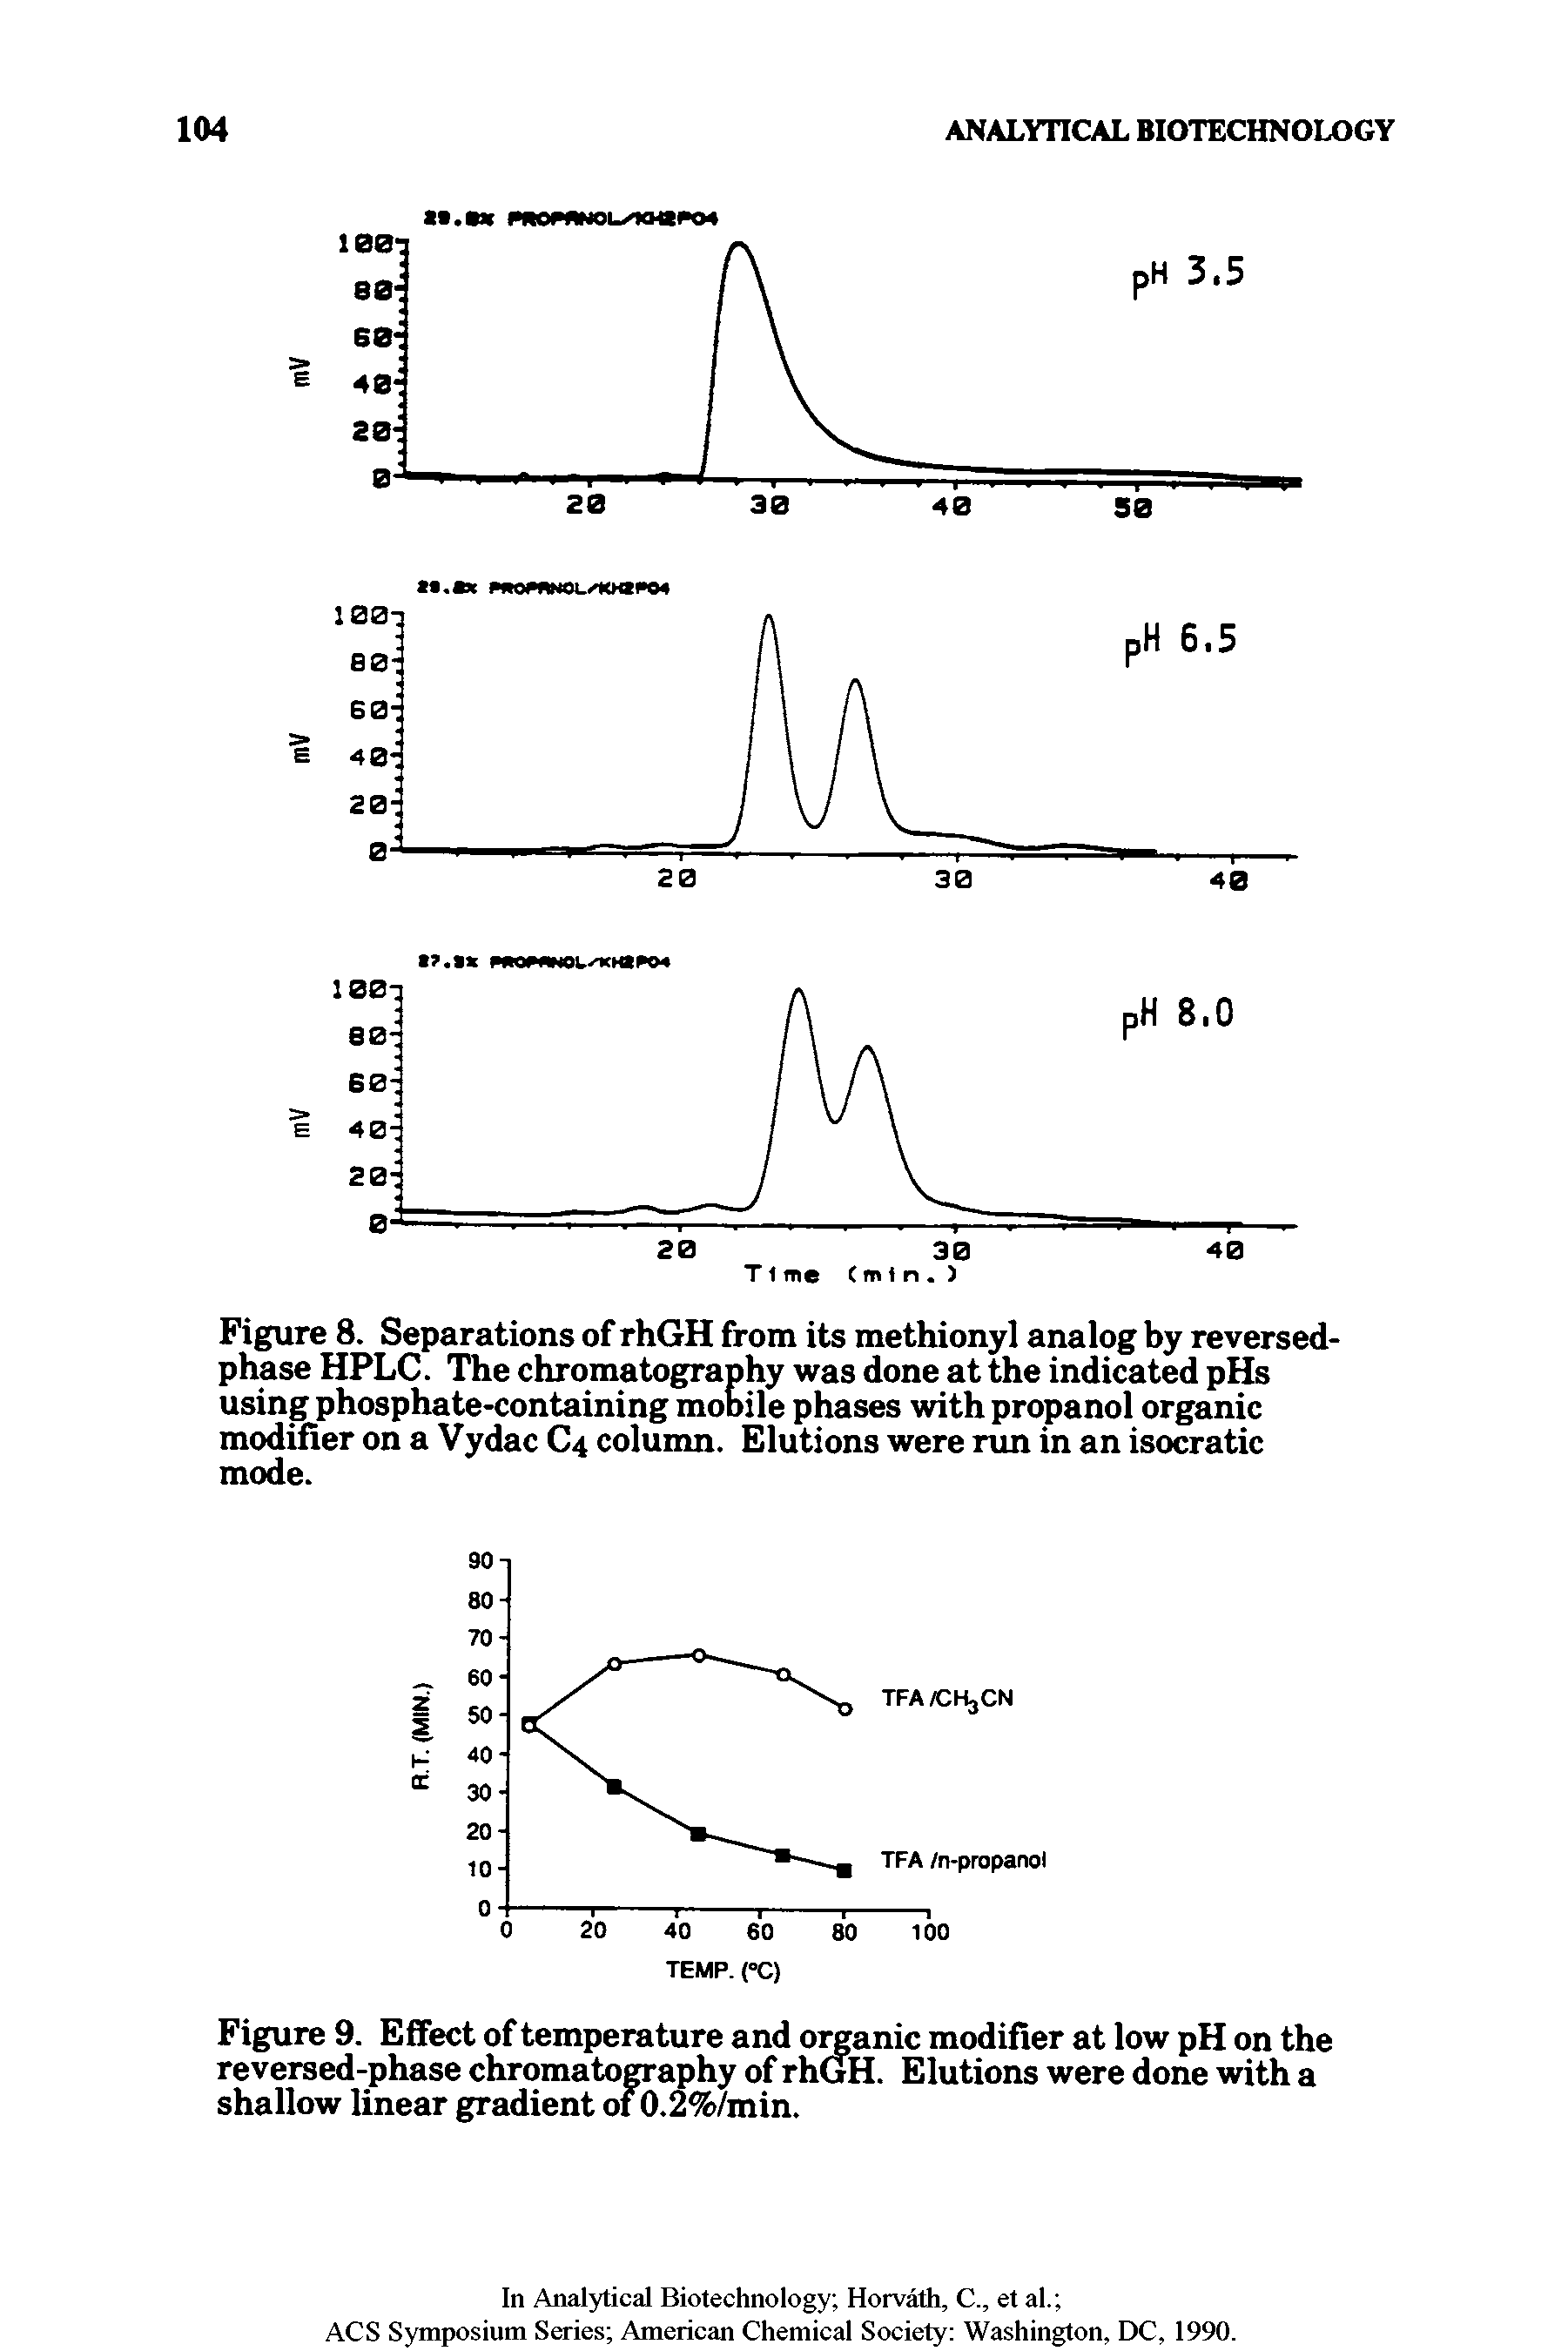 Figure 8. Separations of rhGH from its methionyl analog by reversed-phase HPLC. The chromatography was done at the indicated pHs using phosphate-containing mobile phases with propanol organic modifier on a Vydac C4 column. Elutions were run in an isocratic mode.